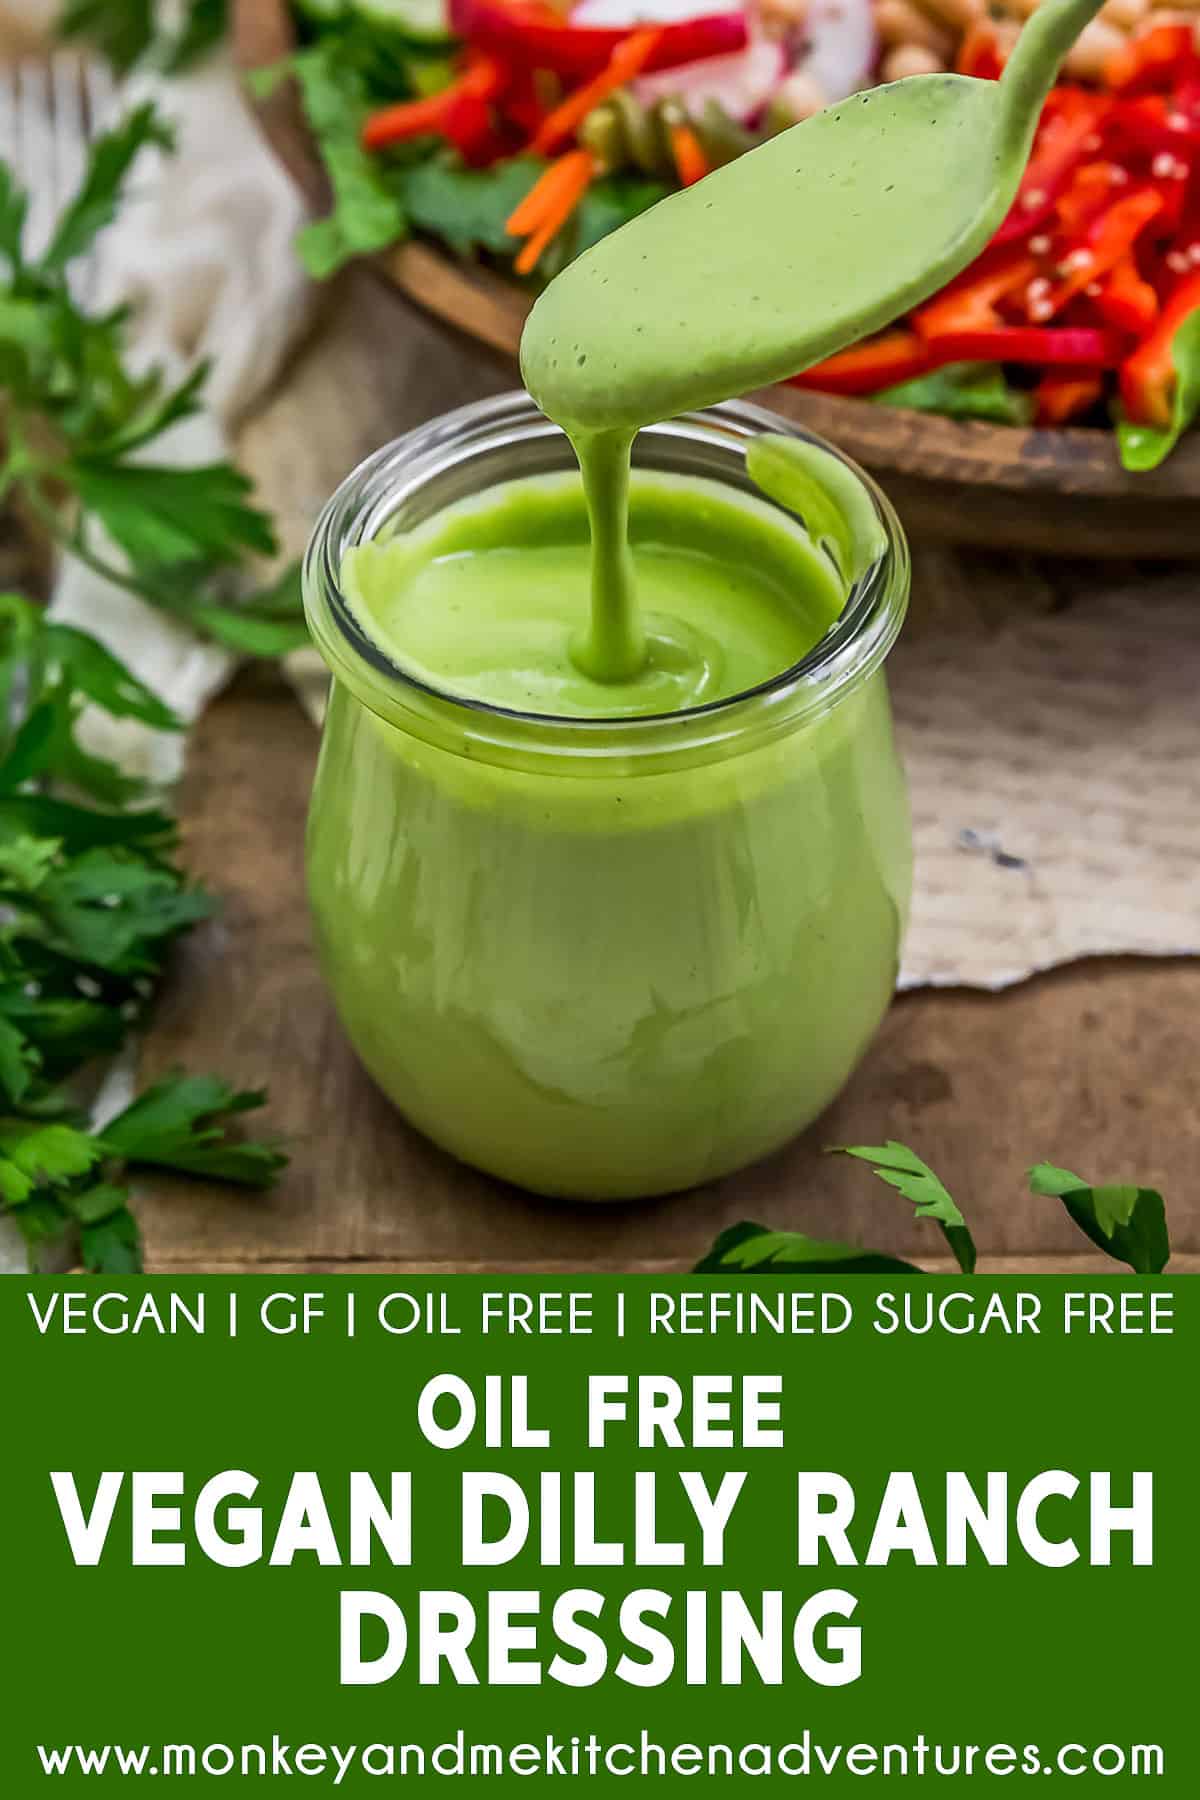 Oil Free Vegan Dilly Ranch Dressing with text description